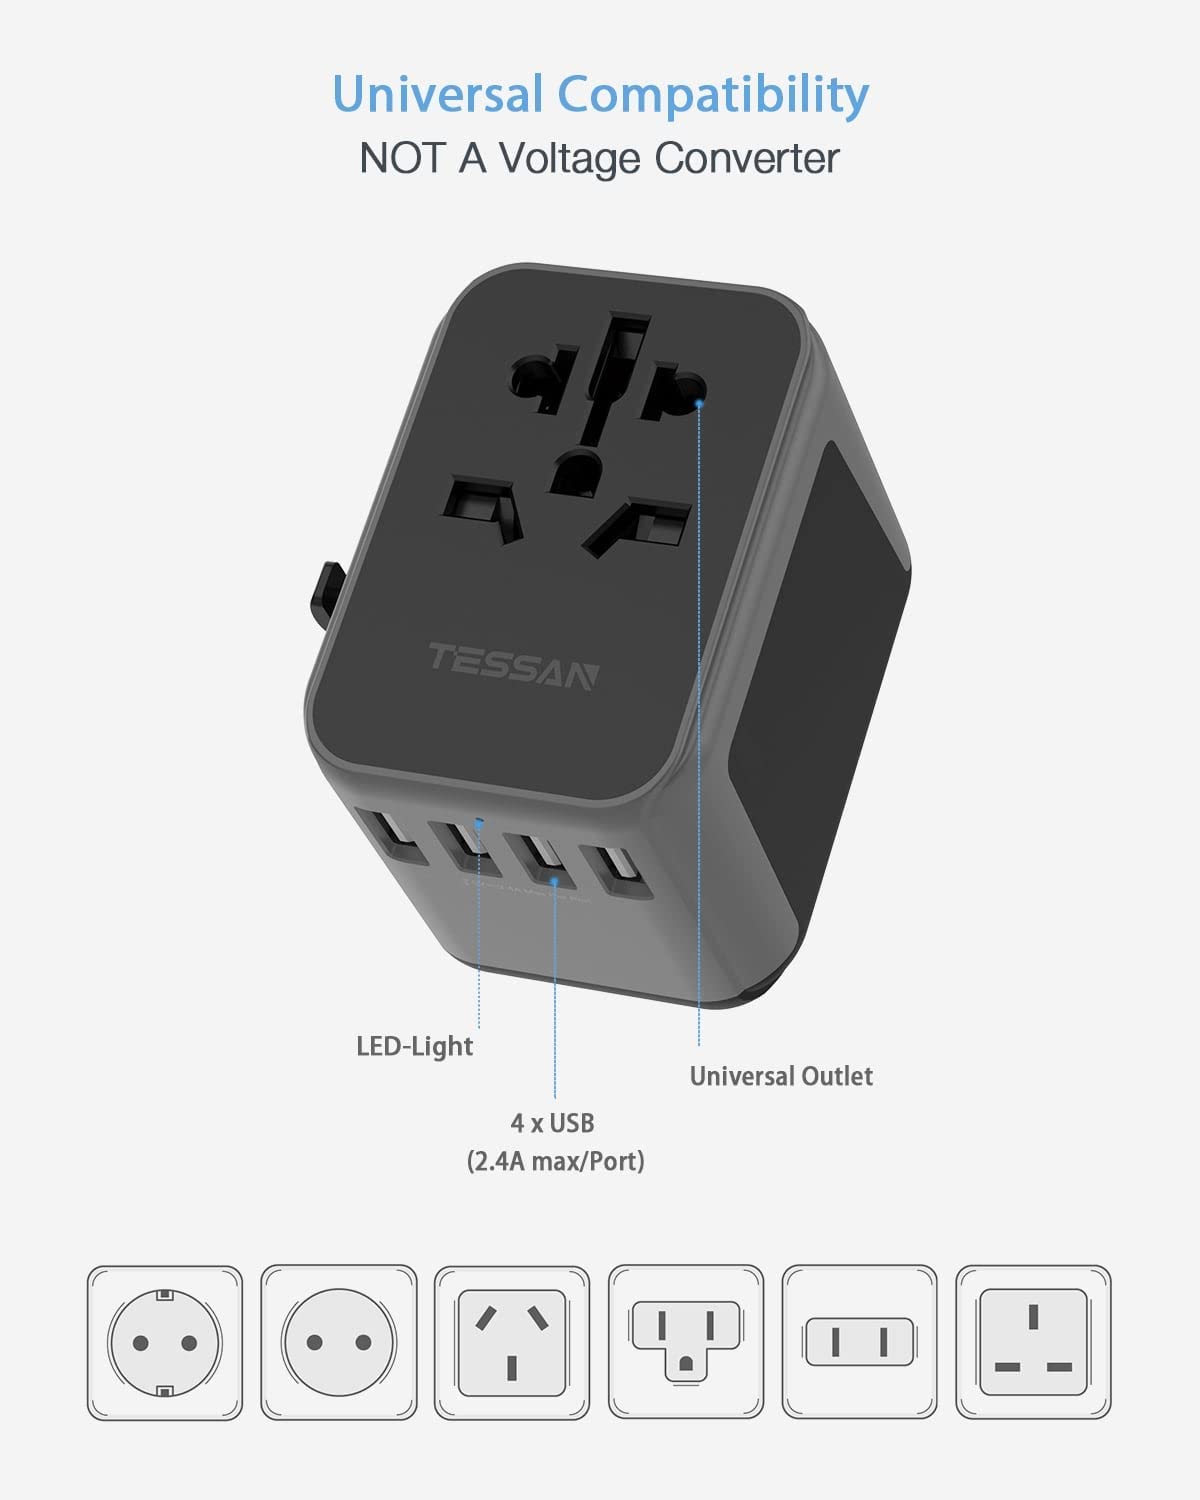 TESSAN Universal Power Adapter, International Plug Adapter with 4 USB Outlets